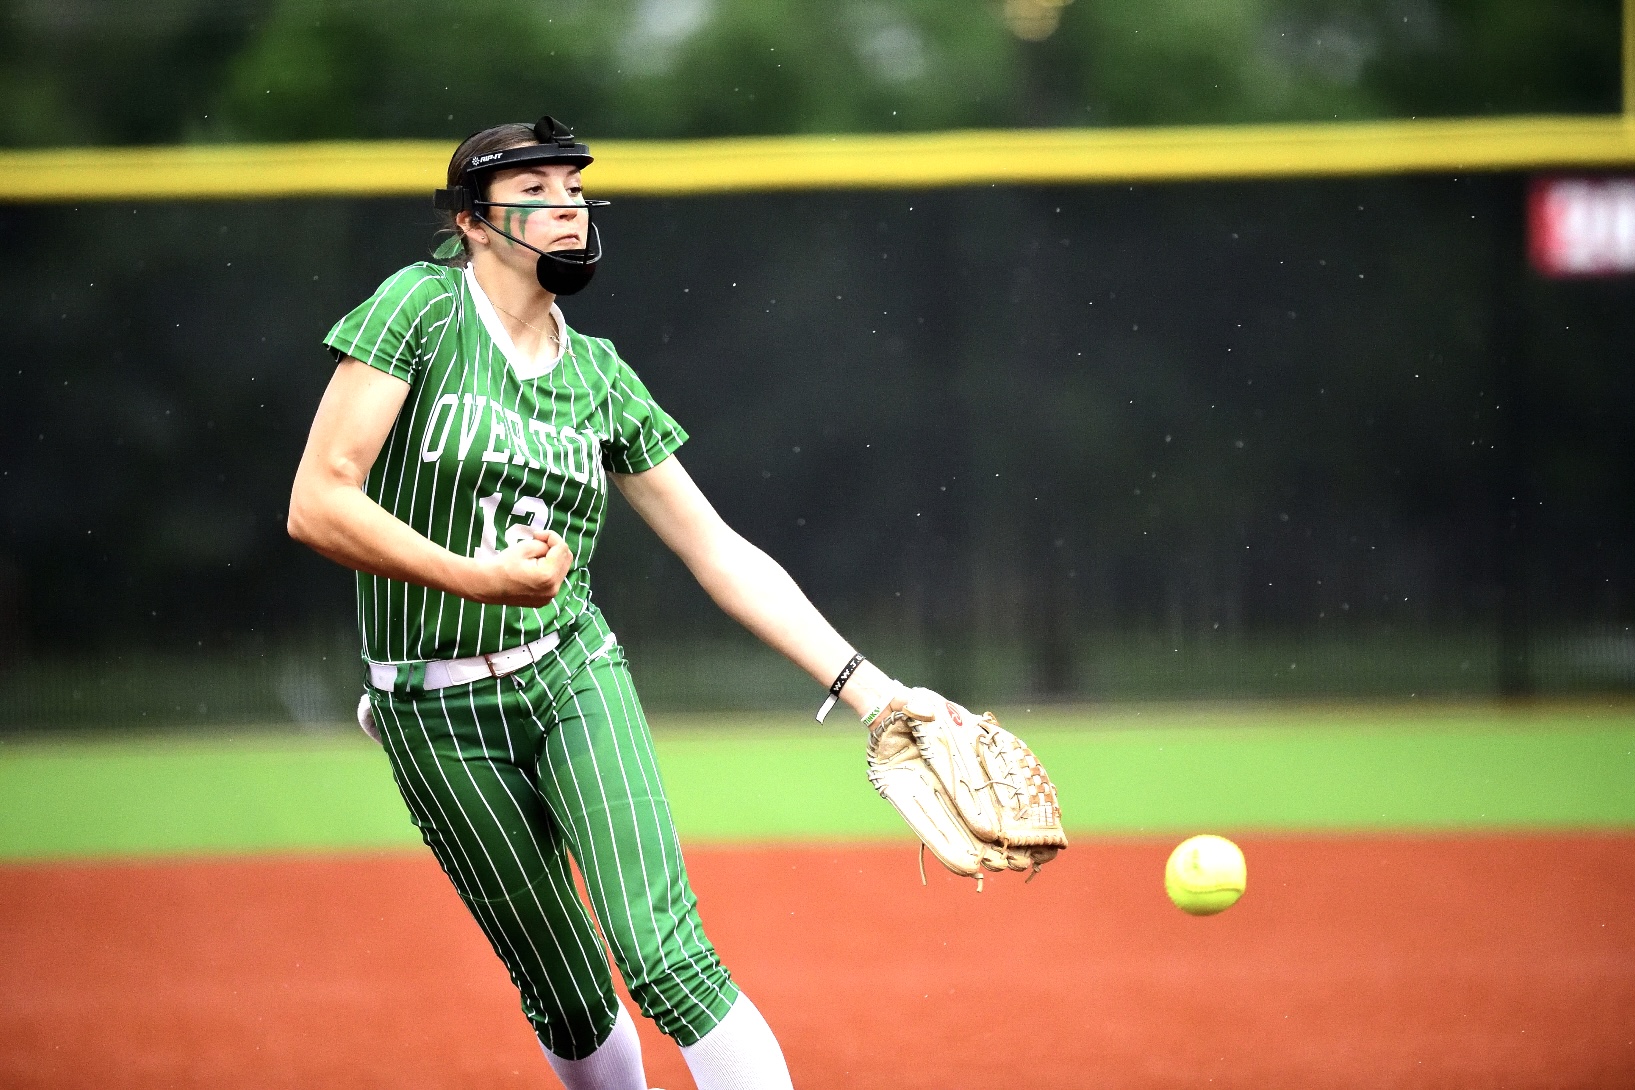 Overton's Kelsey Vaught delivers a pitch to the plate against Martin's Mill at Tyler Legacy's field during a bit of a rain in a UIL Class 2A bi-district softball game on Friday, April 26. Overton won, 12-3, advancing to the second round. (Photo by RONNIE SARTORS - SPORT SHOT PHOTOGRAPHY - ETBLITZ.COM)